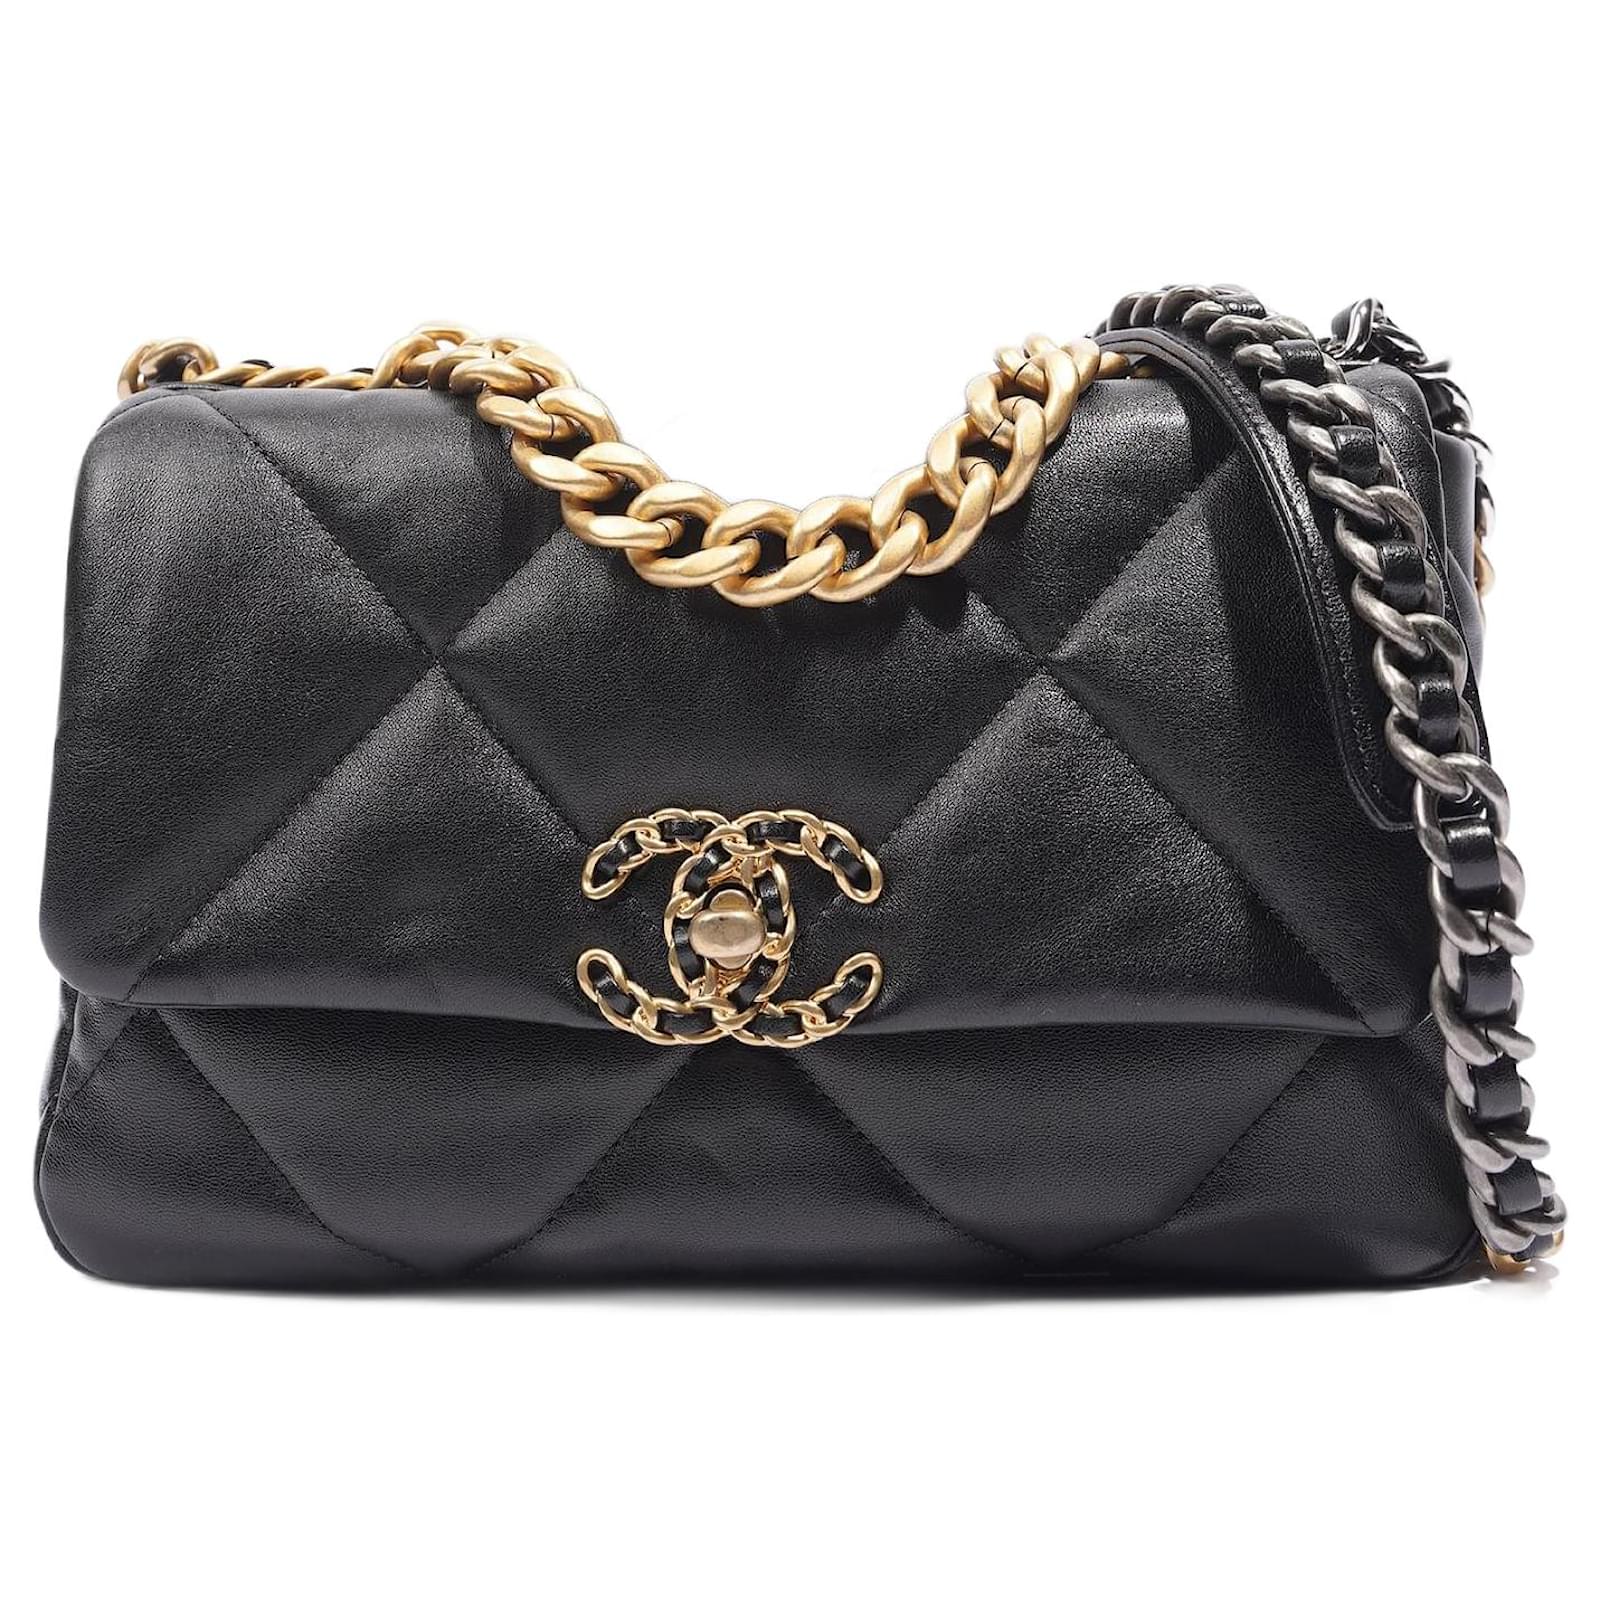 Chanel 19 Small Pouch Black Lambskin Gold Hardware